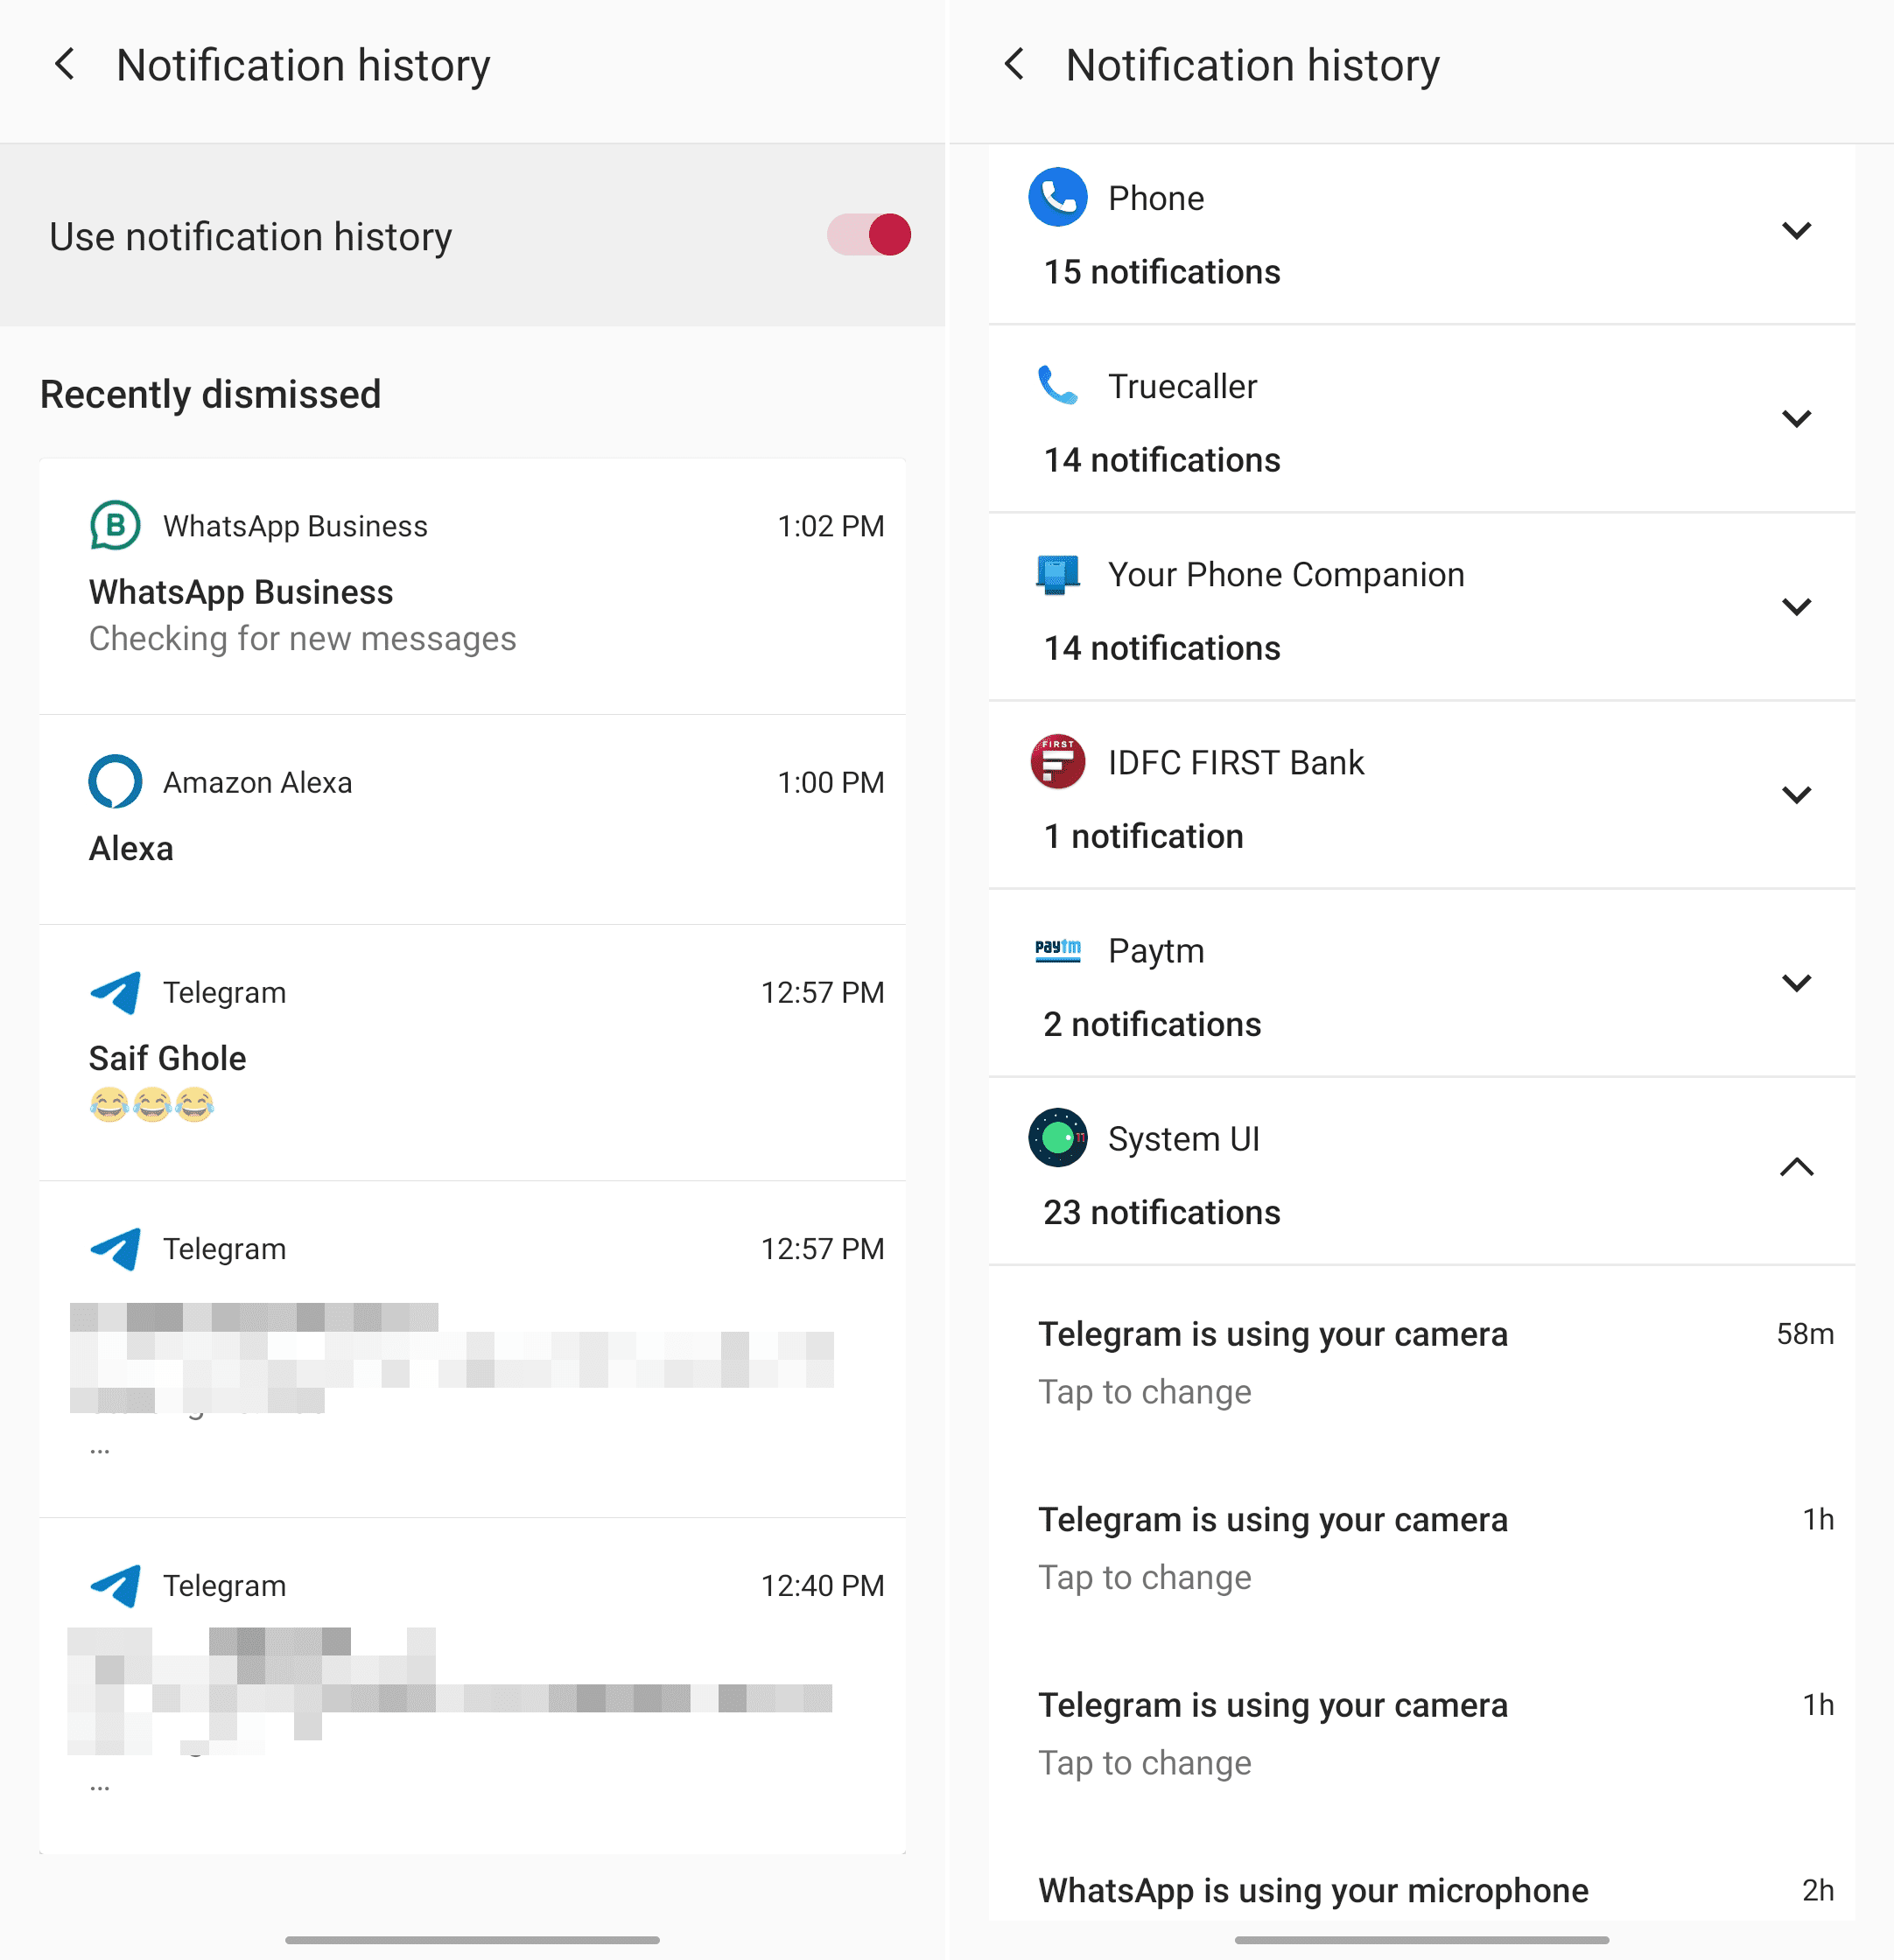 Notification History in Android - list all notifications received in past 24 hours